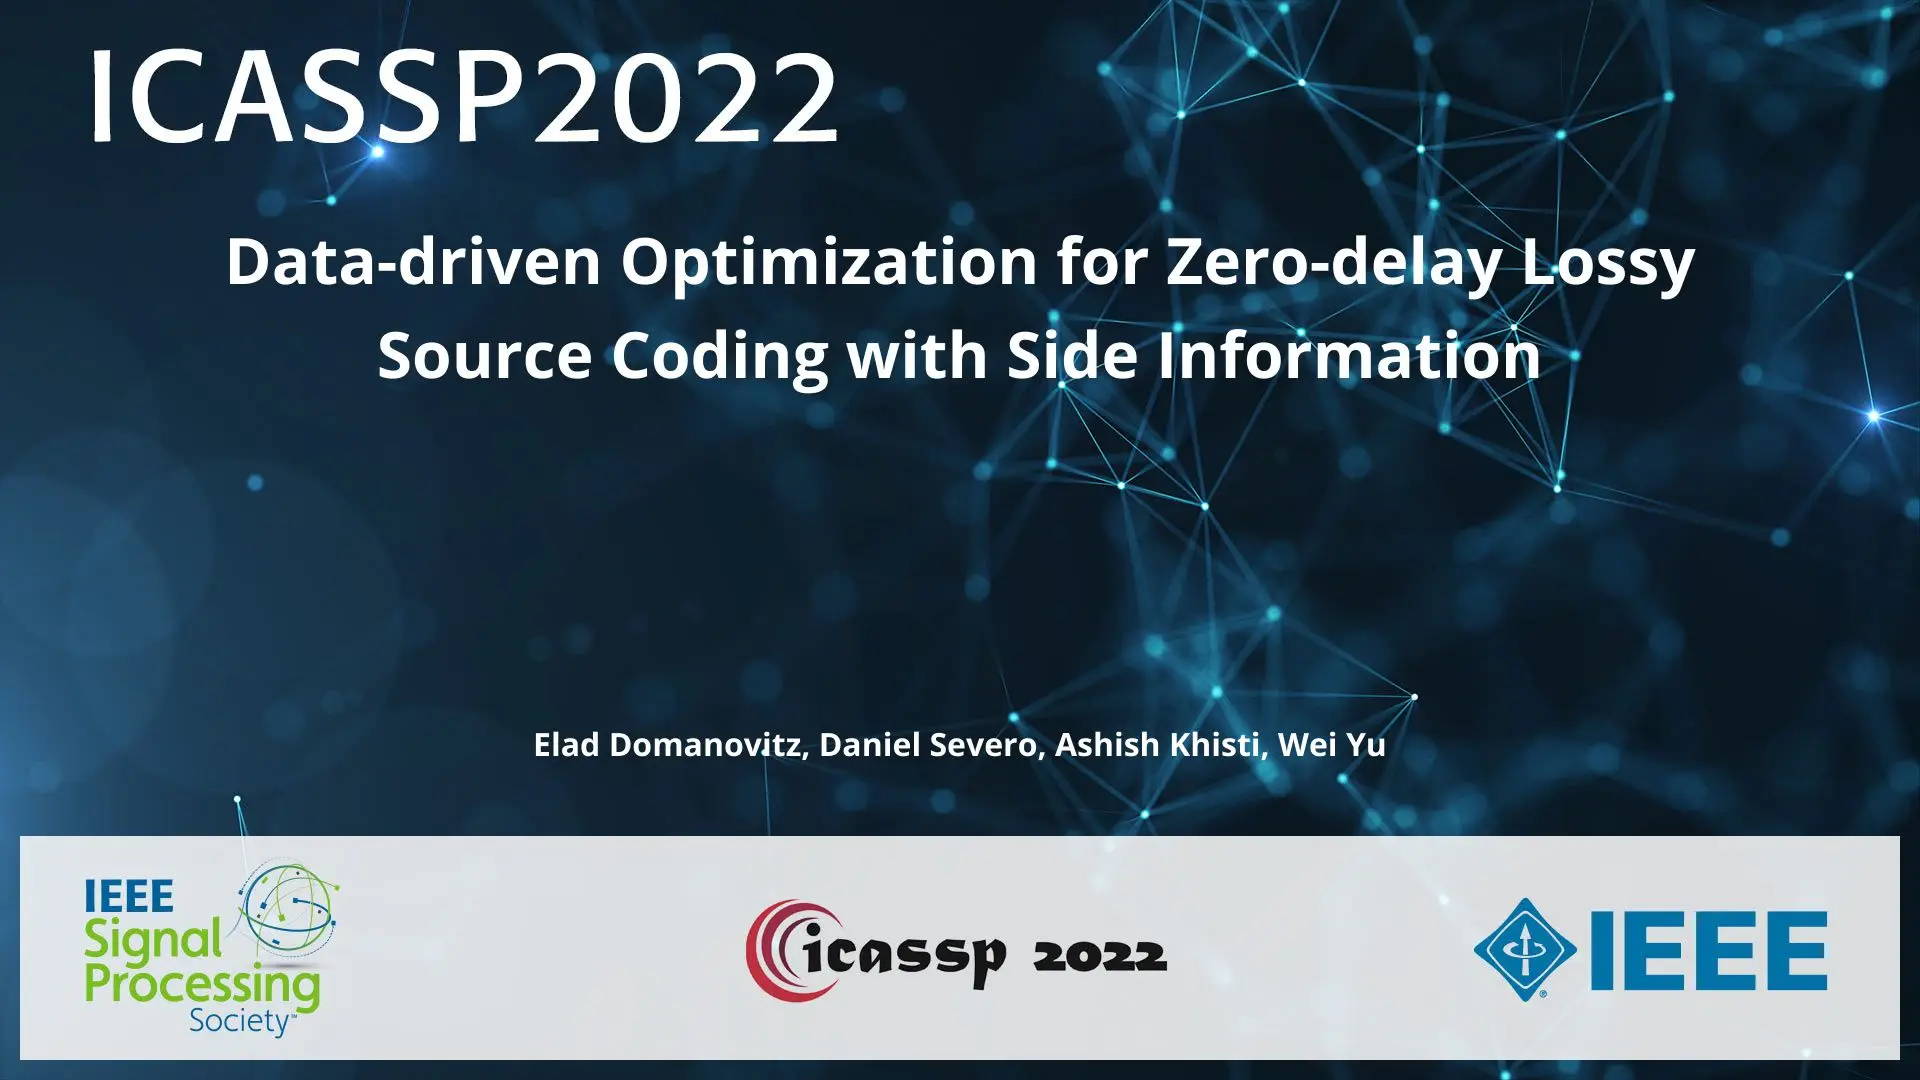 Data-driven Optimization for Zero-delay Lossy Source Coding with Side Information